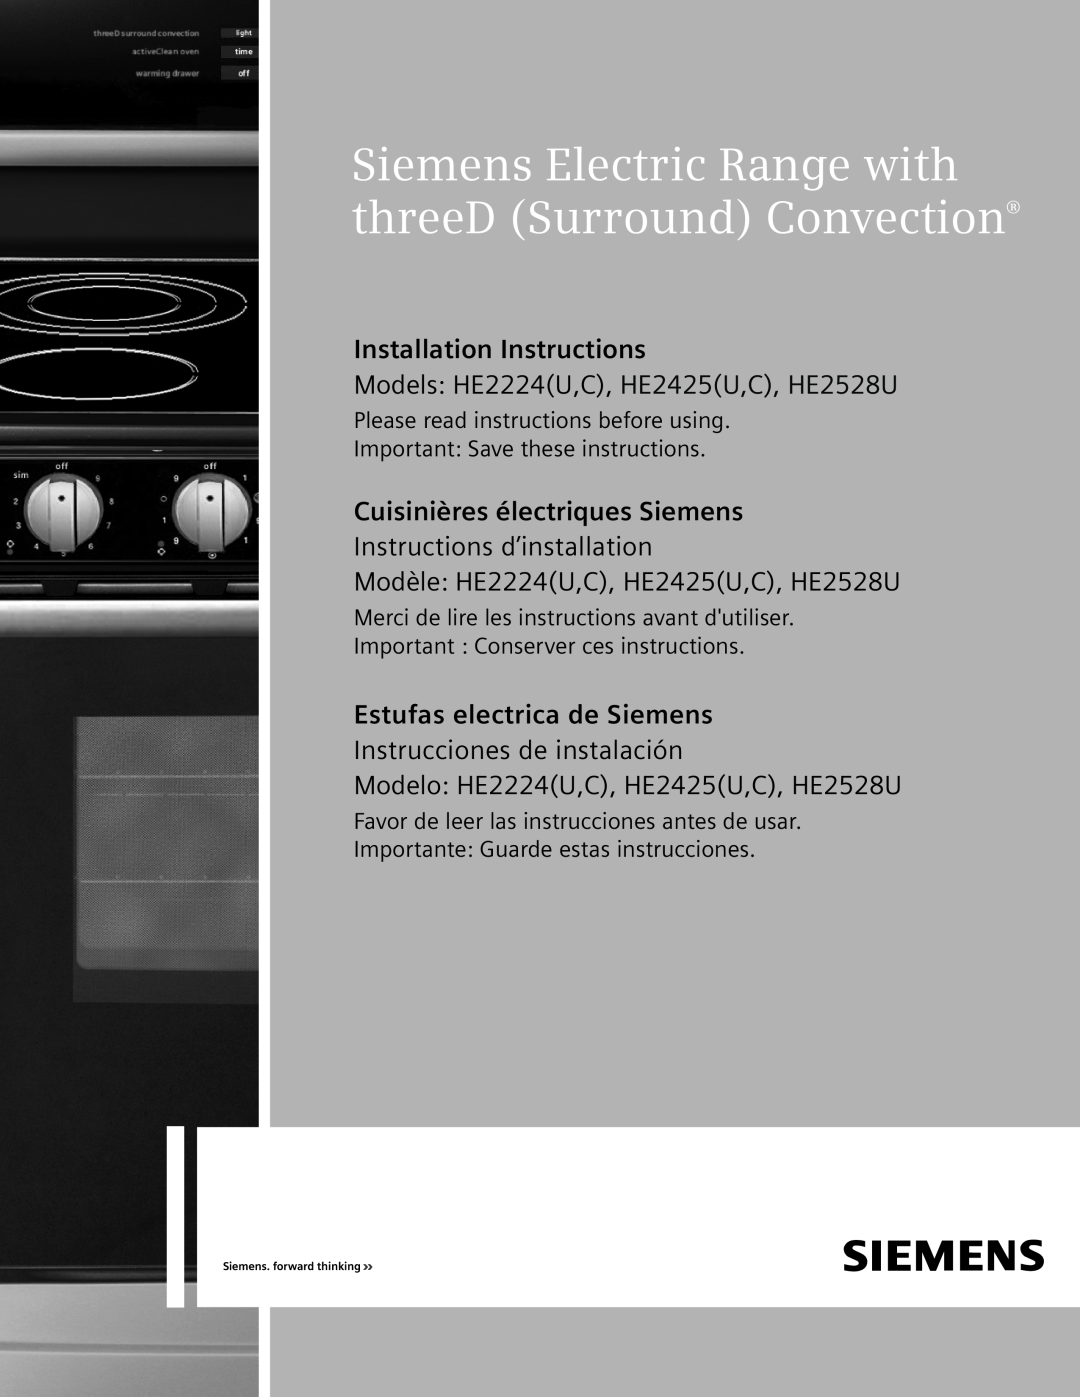 Siemens C) installation instructions Siemens Electric Range with threeD Surround Convection, Installation Instructions 